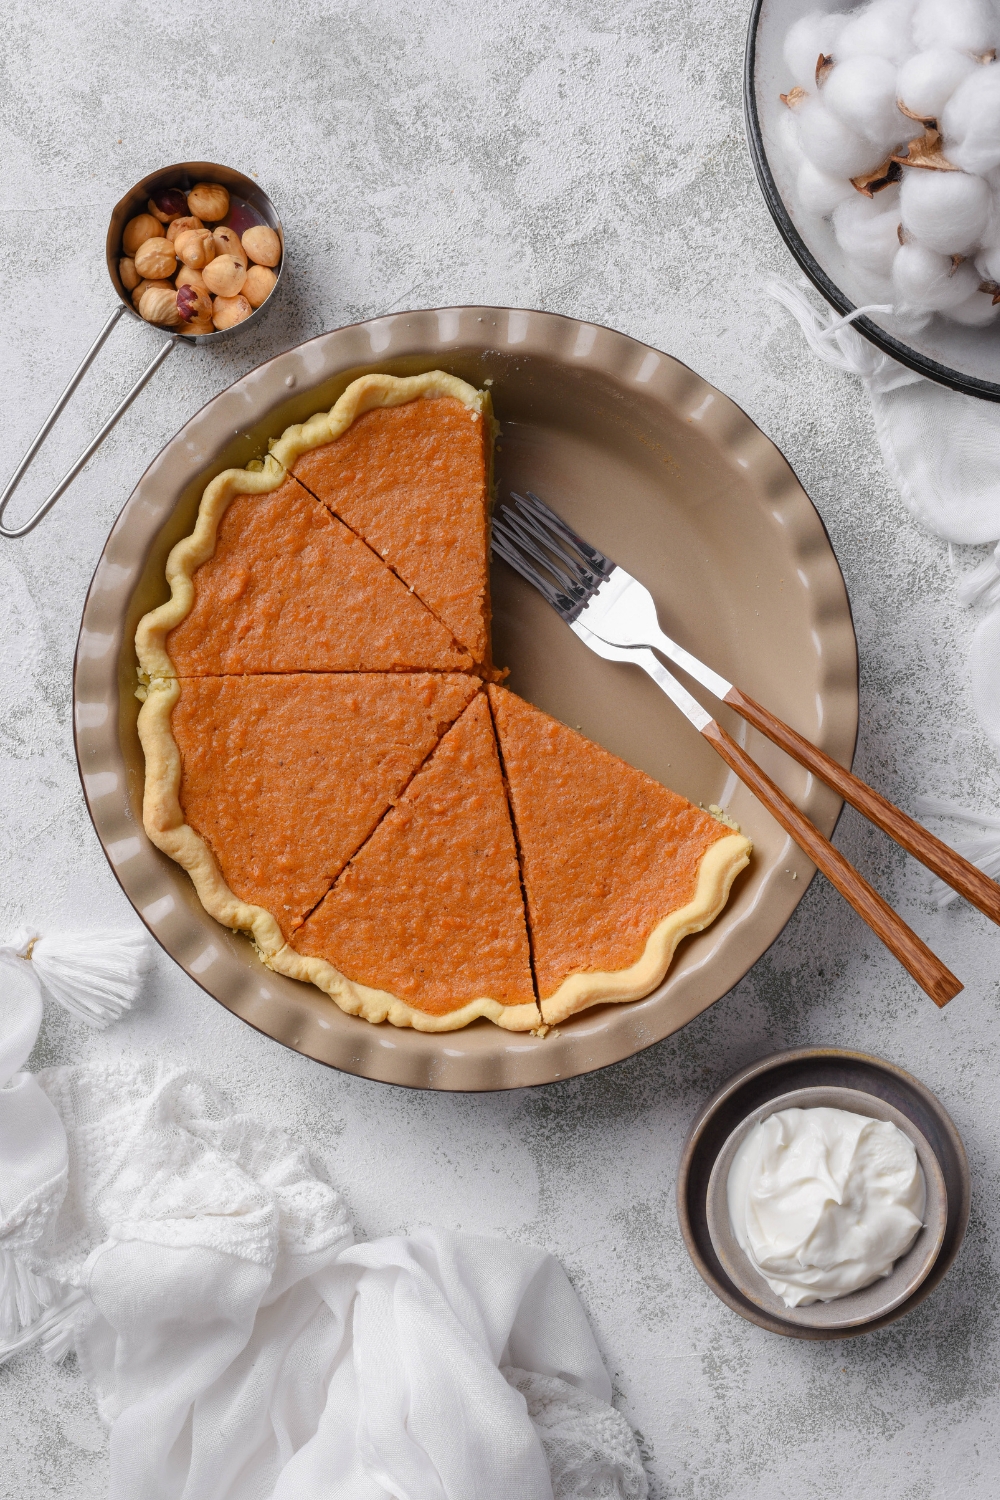 A sweet potato pie that has been sliced into equal-sized pieces with some pieces missing. There are two forks in the pie pan.